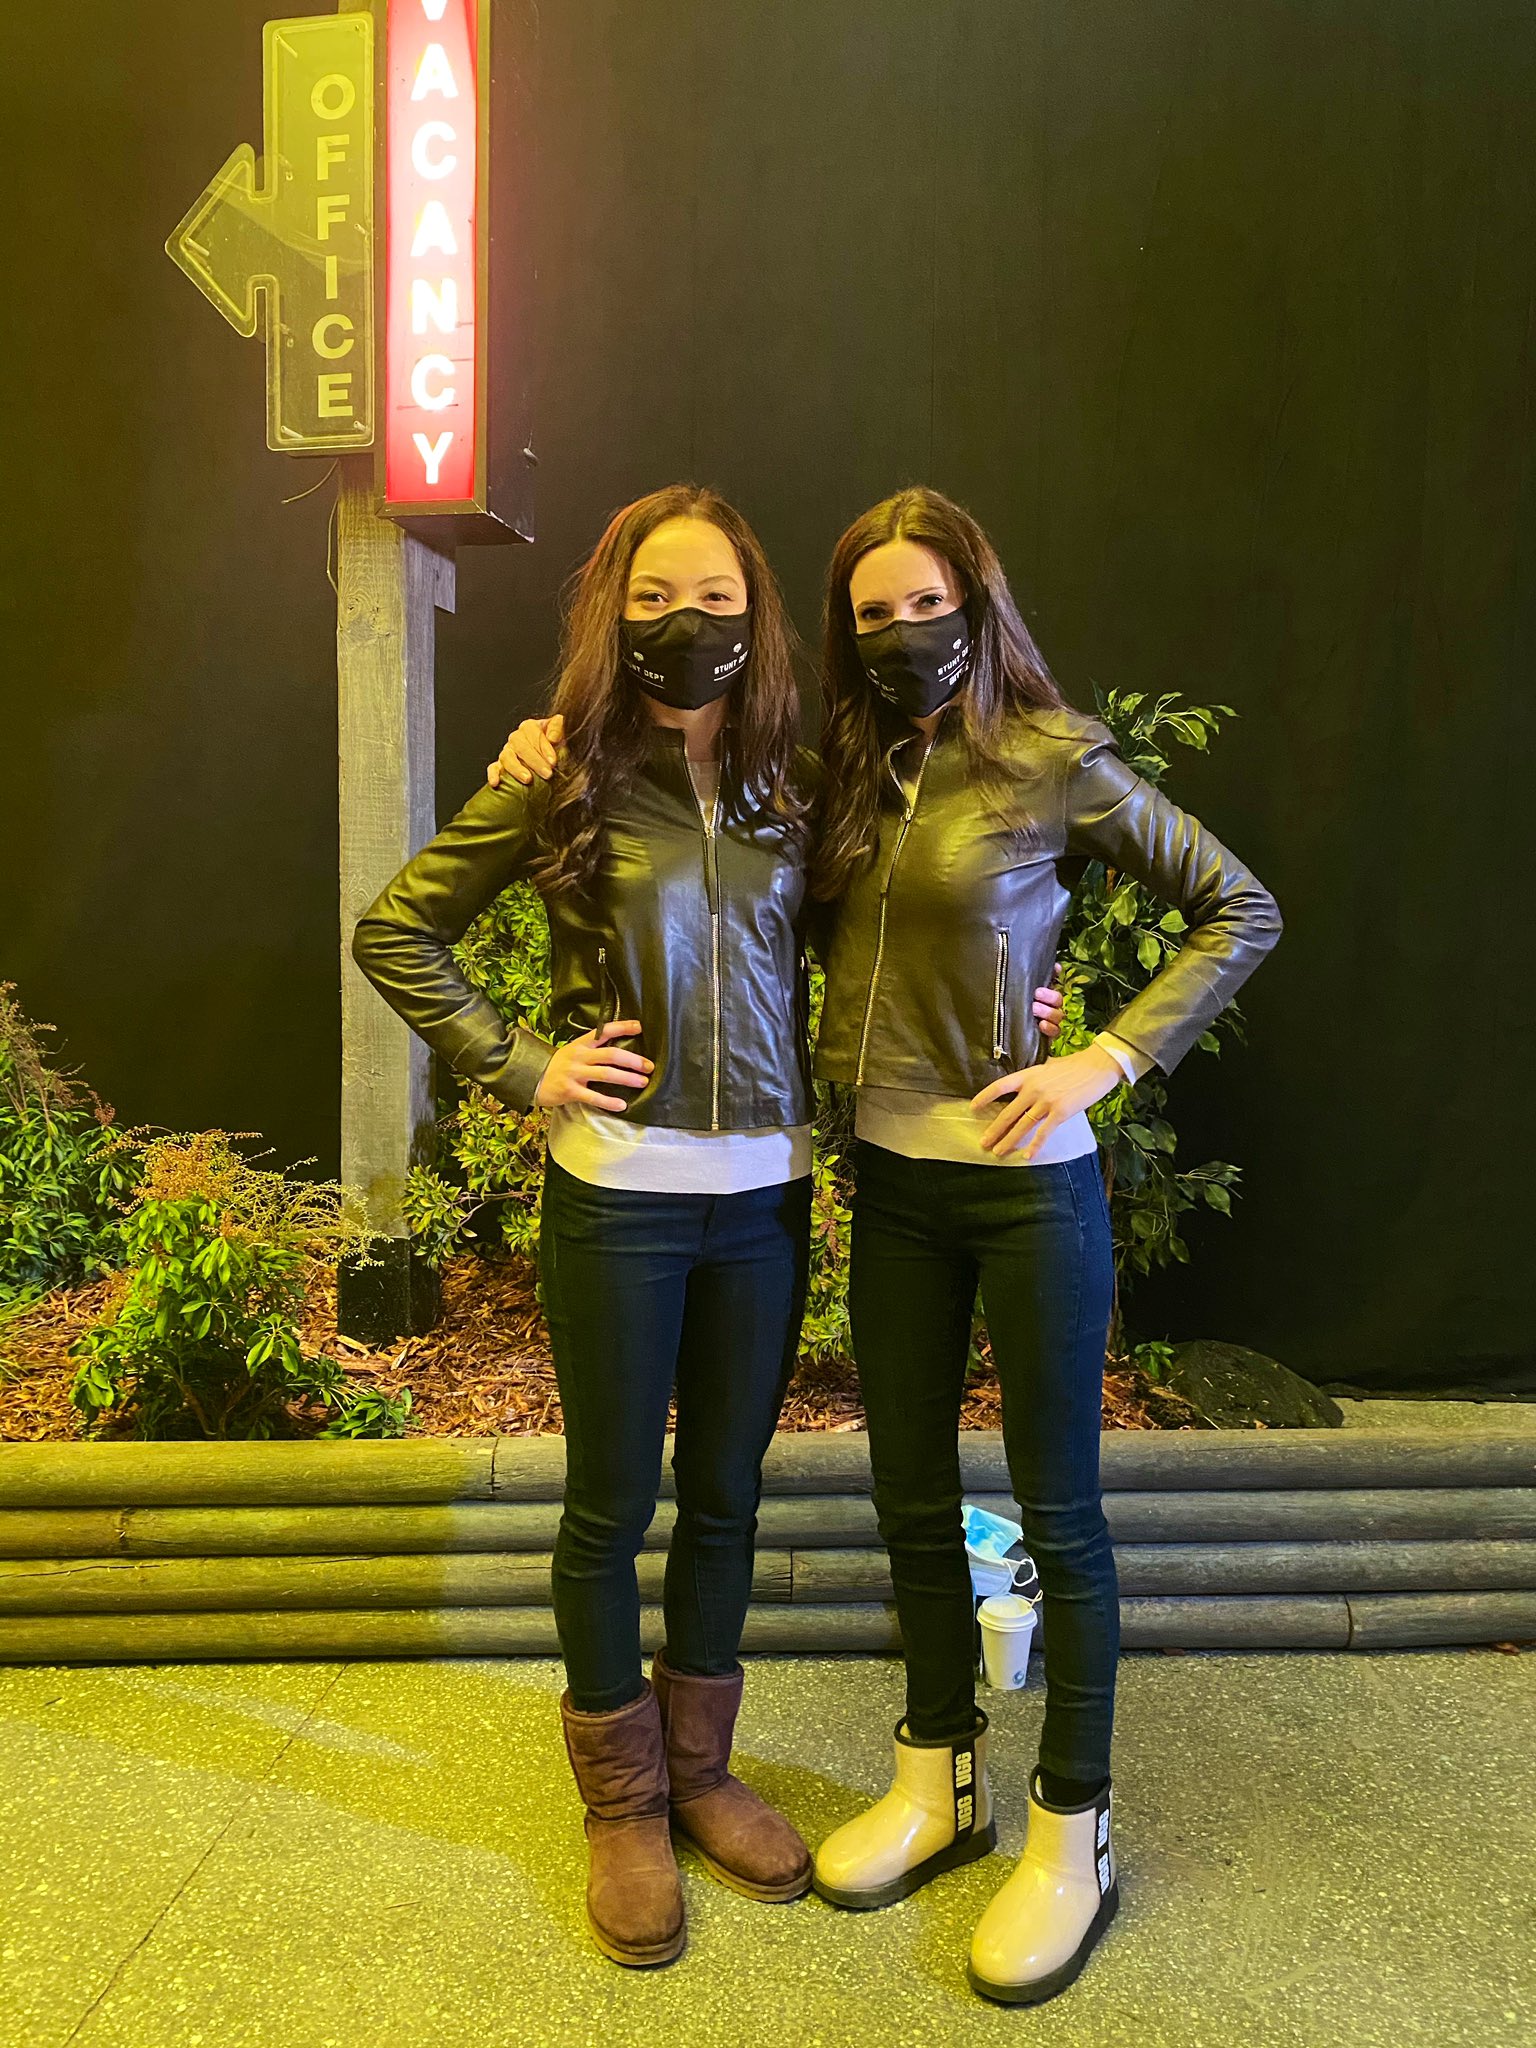 Bitsie Tulloch Poses with Lois Lane Stunt Double